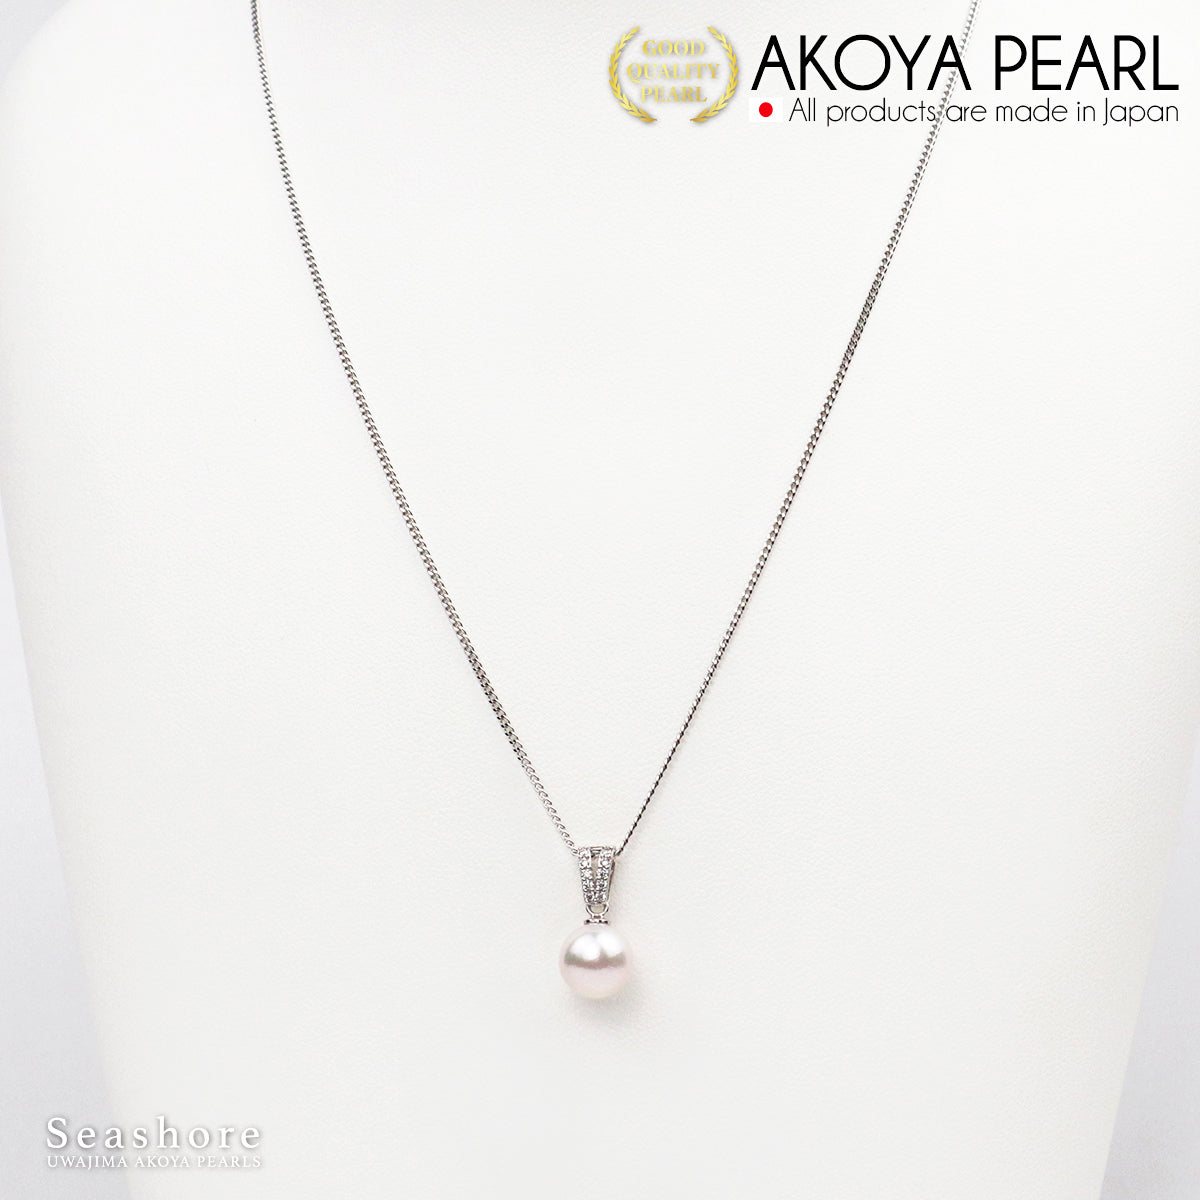 Akoya Pearl V-shaped Pearl Necklace Design Vatican [8.0-8.5mm] Free Gift Included SV925 50cm with Slide Adjuster Chain Pearl Pendant (3999)